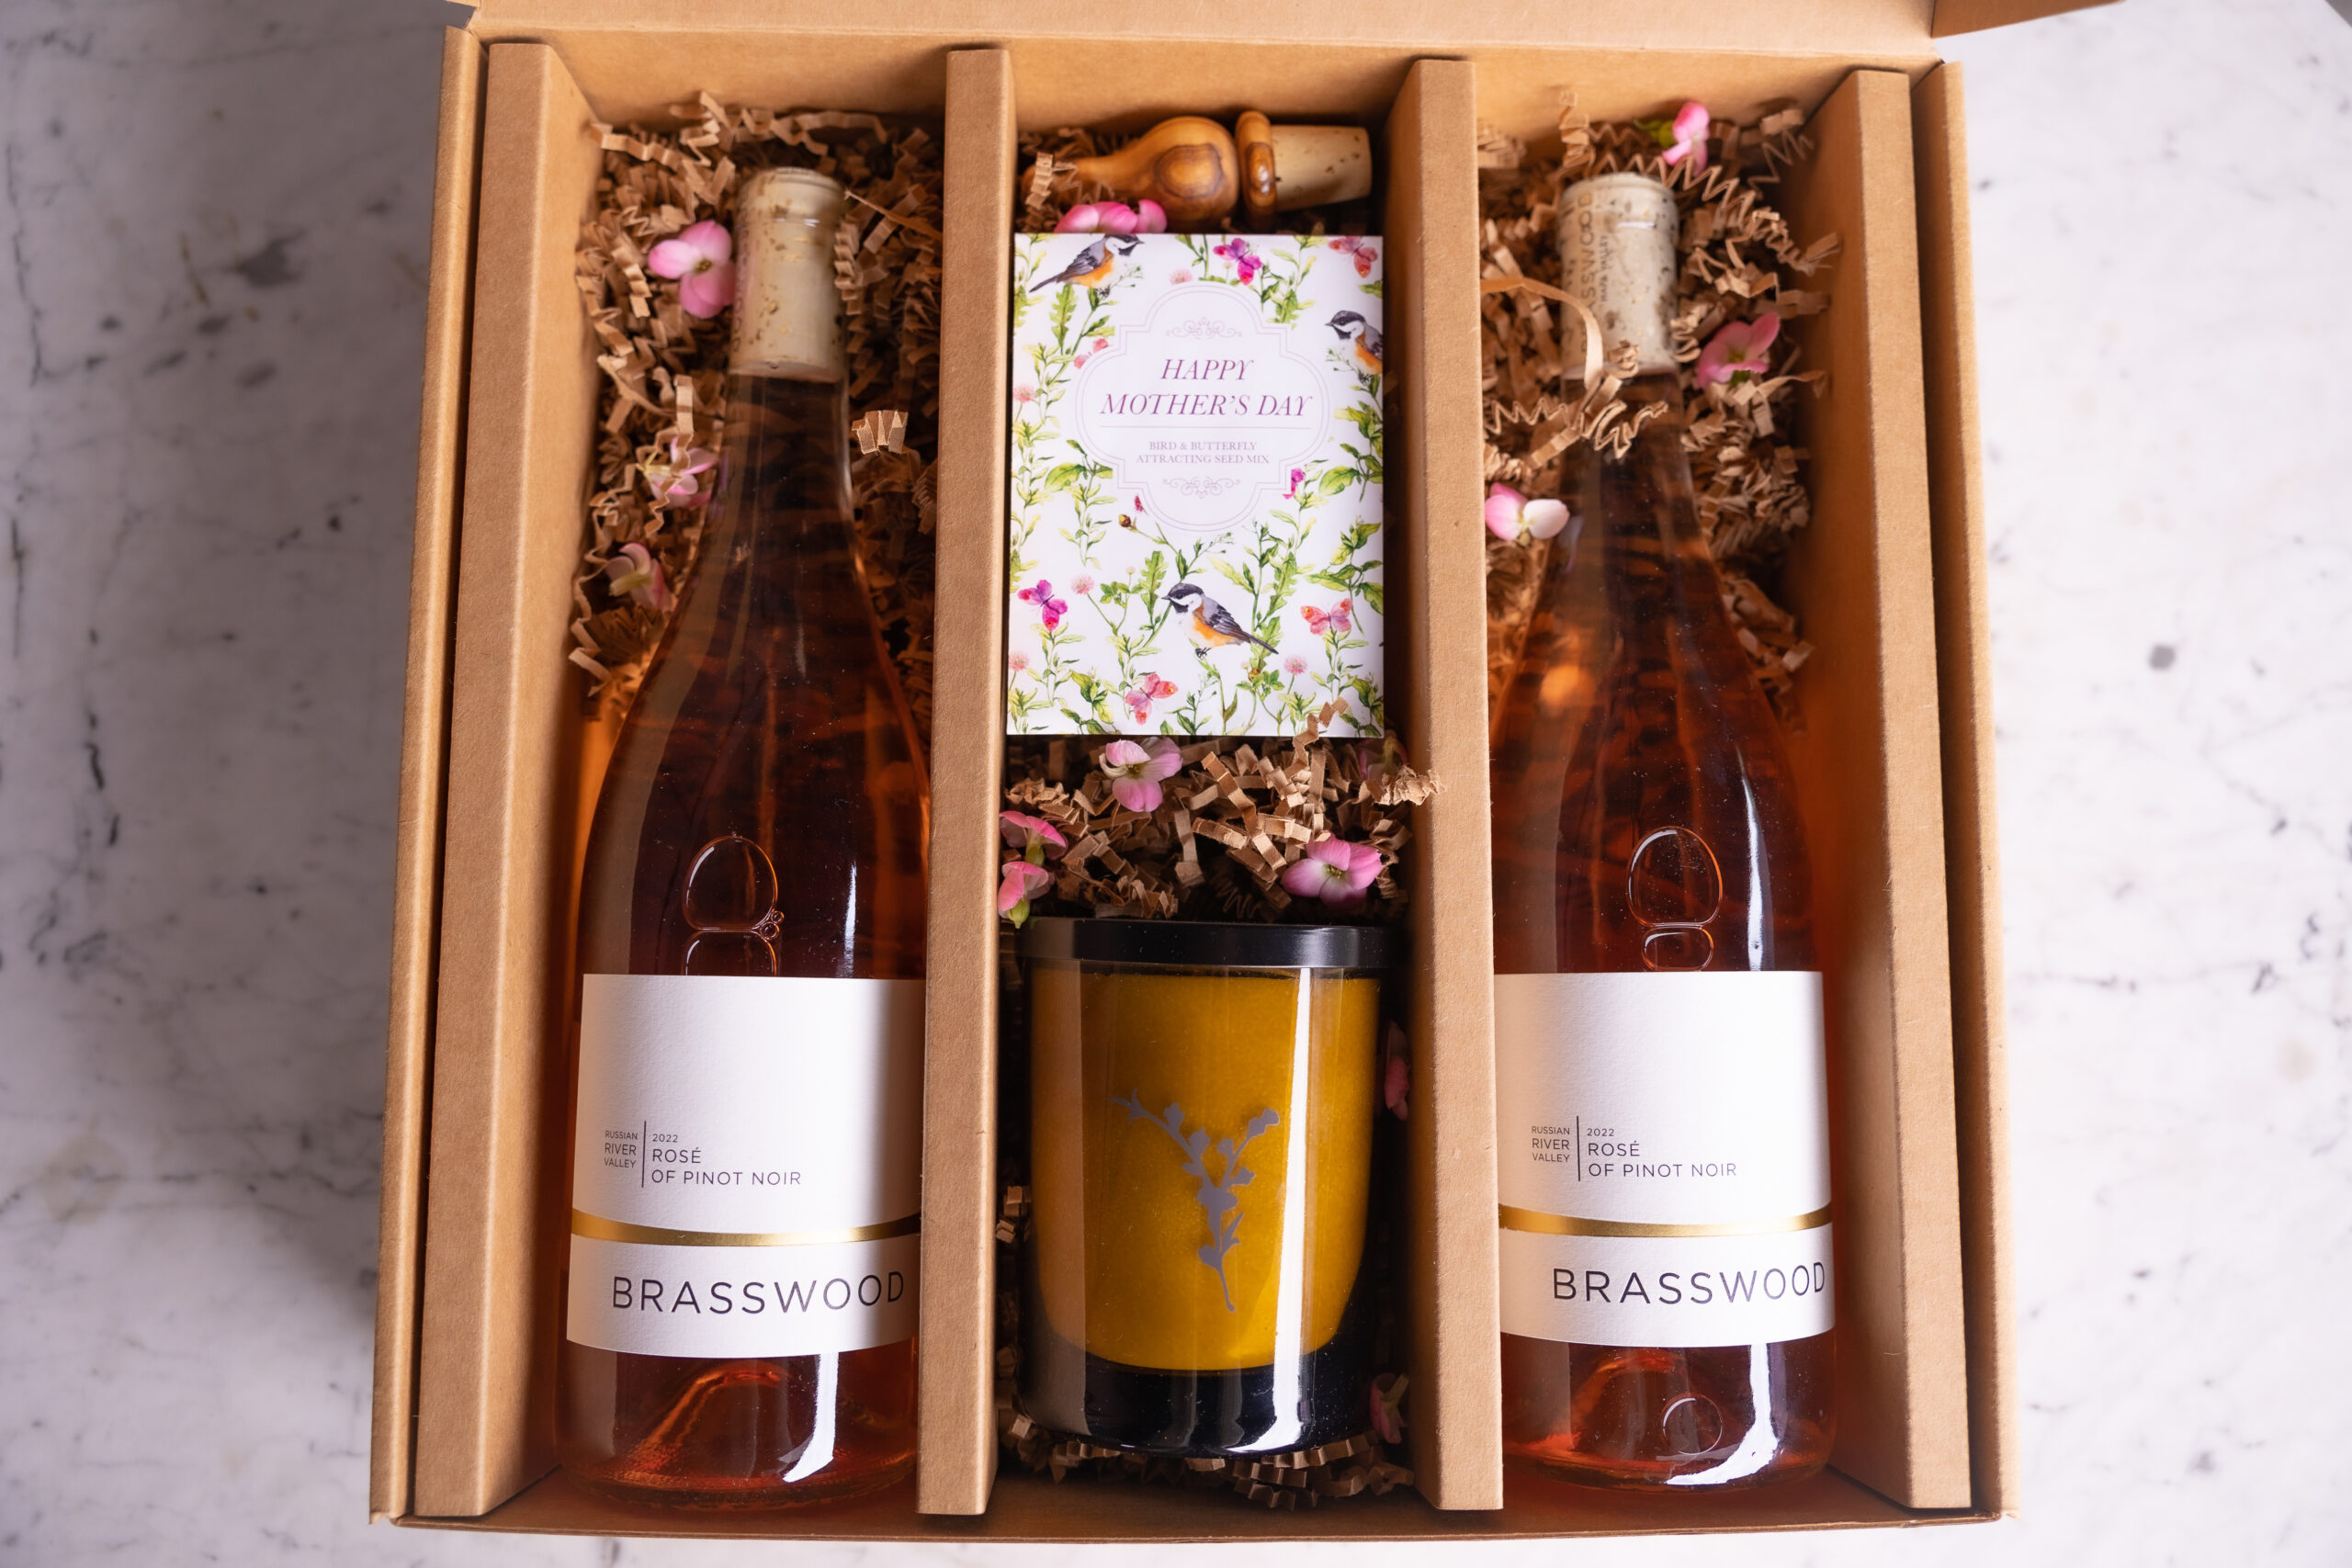 Photo of a gift box with two Brasswood Cellars' Rosé of Pinot Noir bottles, a candle, and wildflower seeds packet.